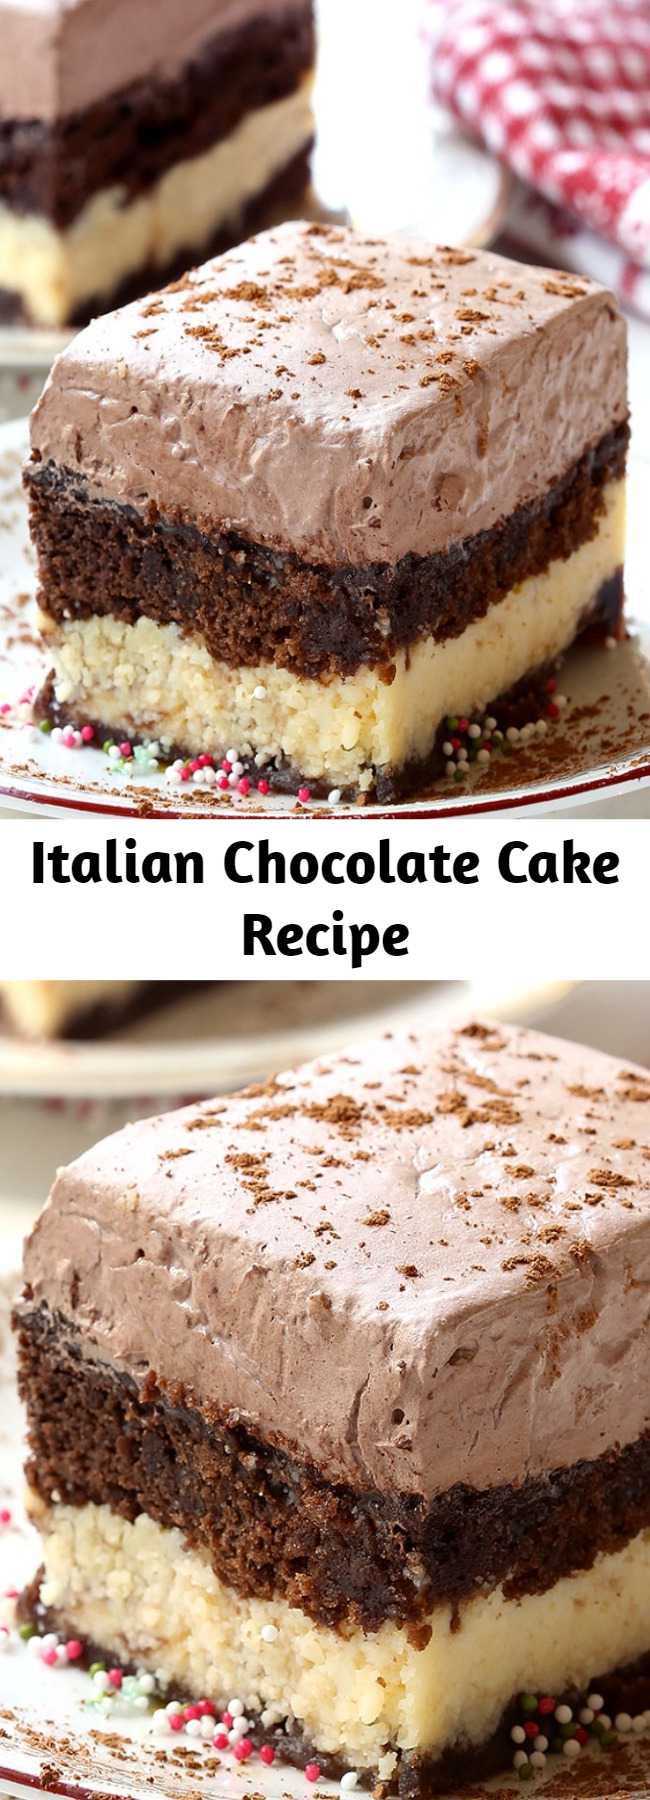 Italian Chocolate Cake Recipe - A combination of chocolate marble cake and cheesecake with a creamy chocolate topping, this Italian Chocolate Cake is an absolute must try.